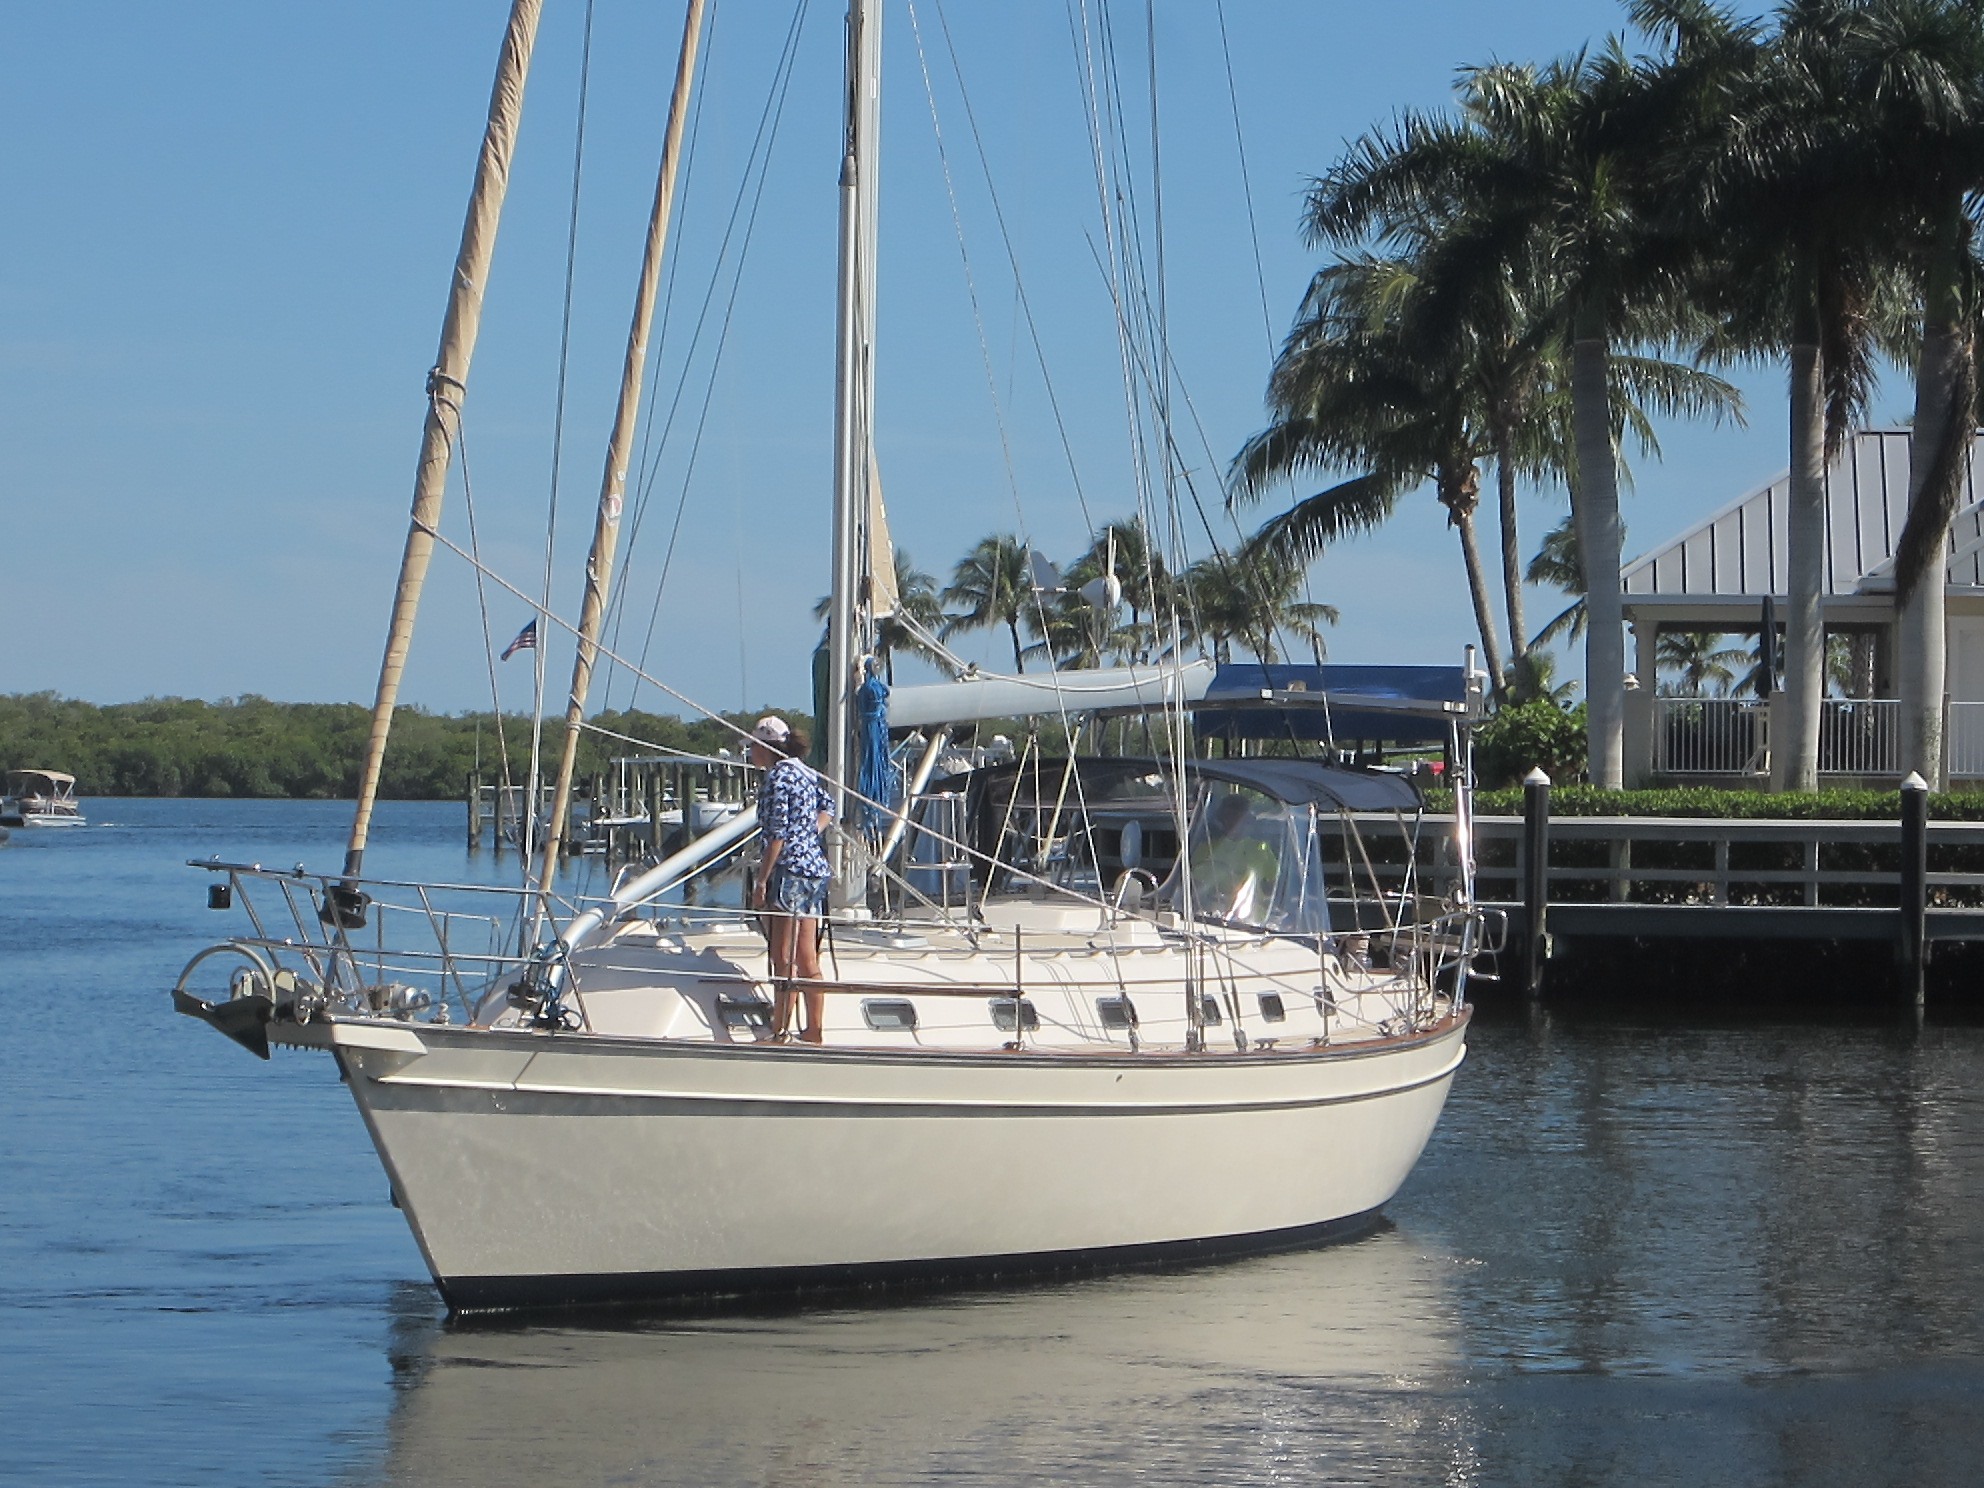 Southwest Florida Yachts Seeking Sail and Power Vessels for Charter Fleet